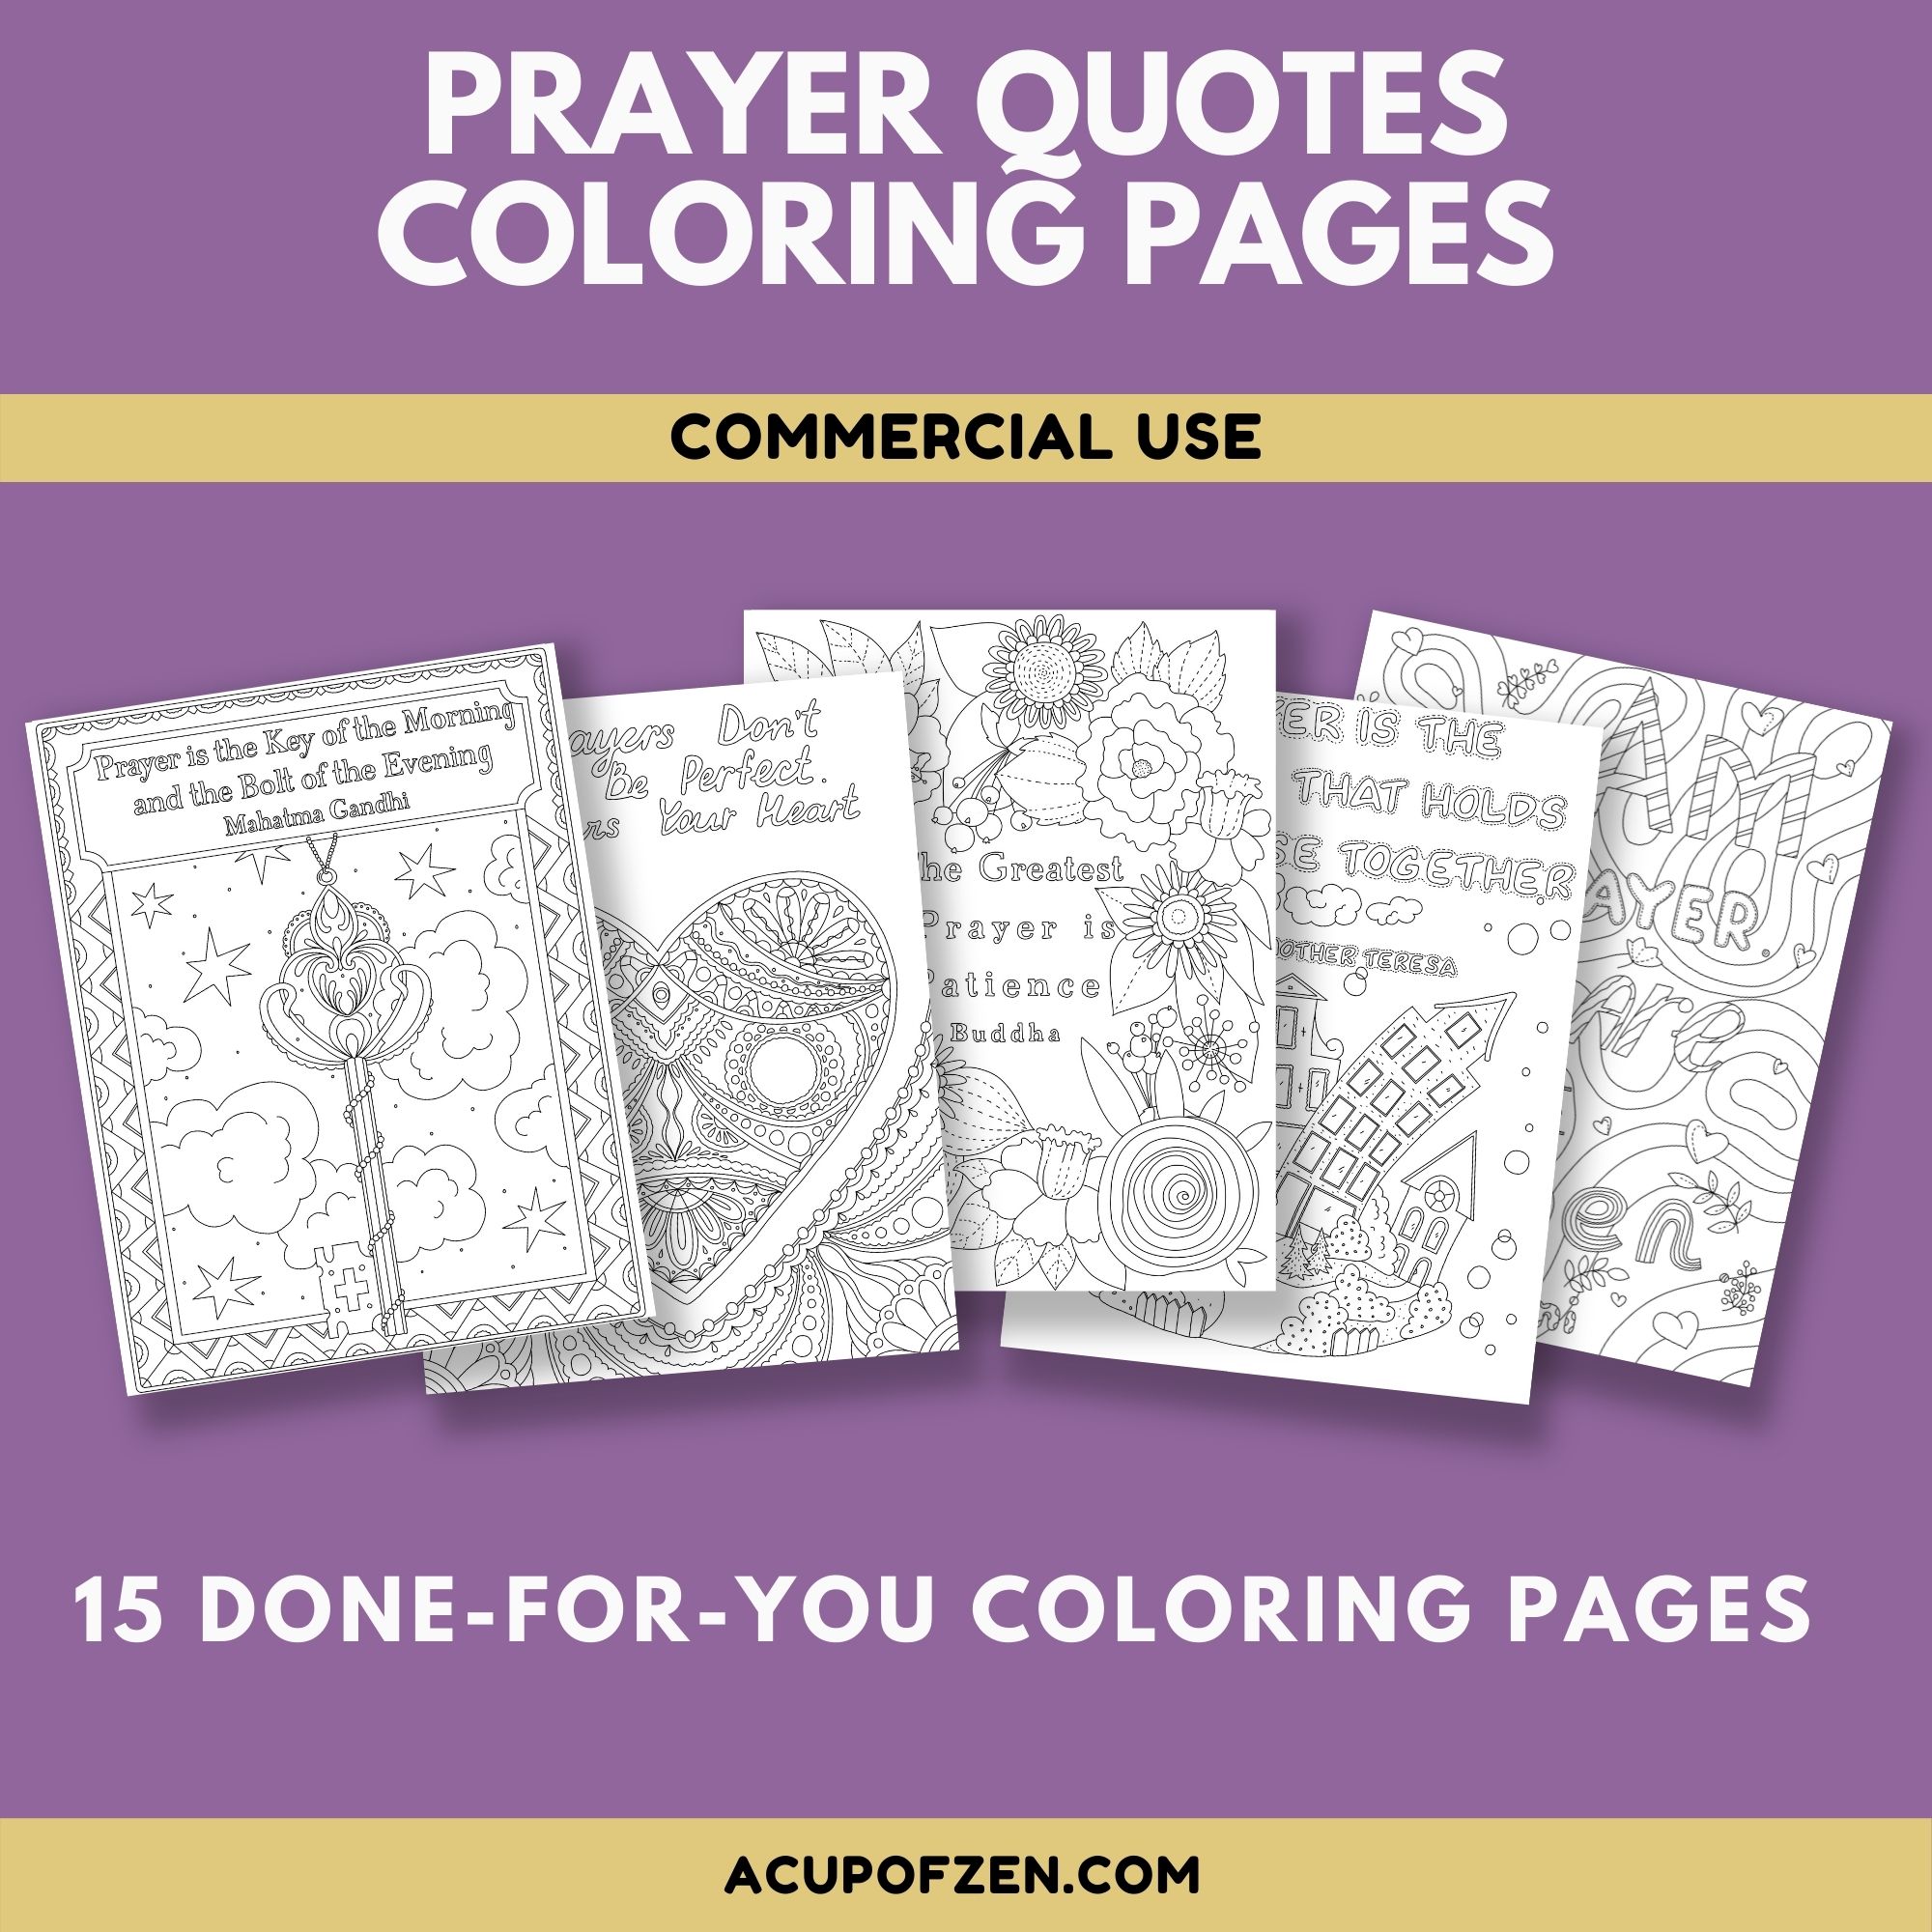 Prayer Quotes Coloring Pages